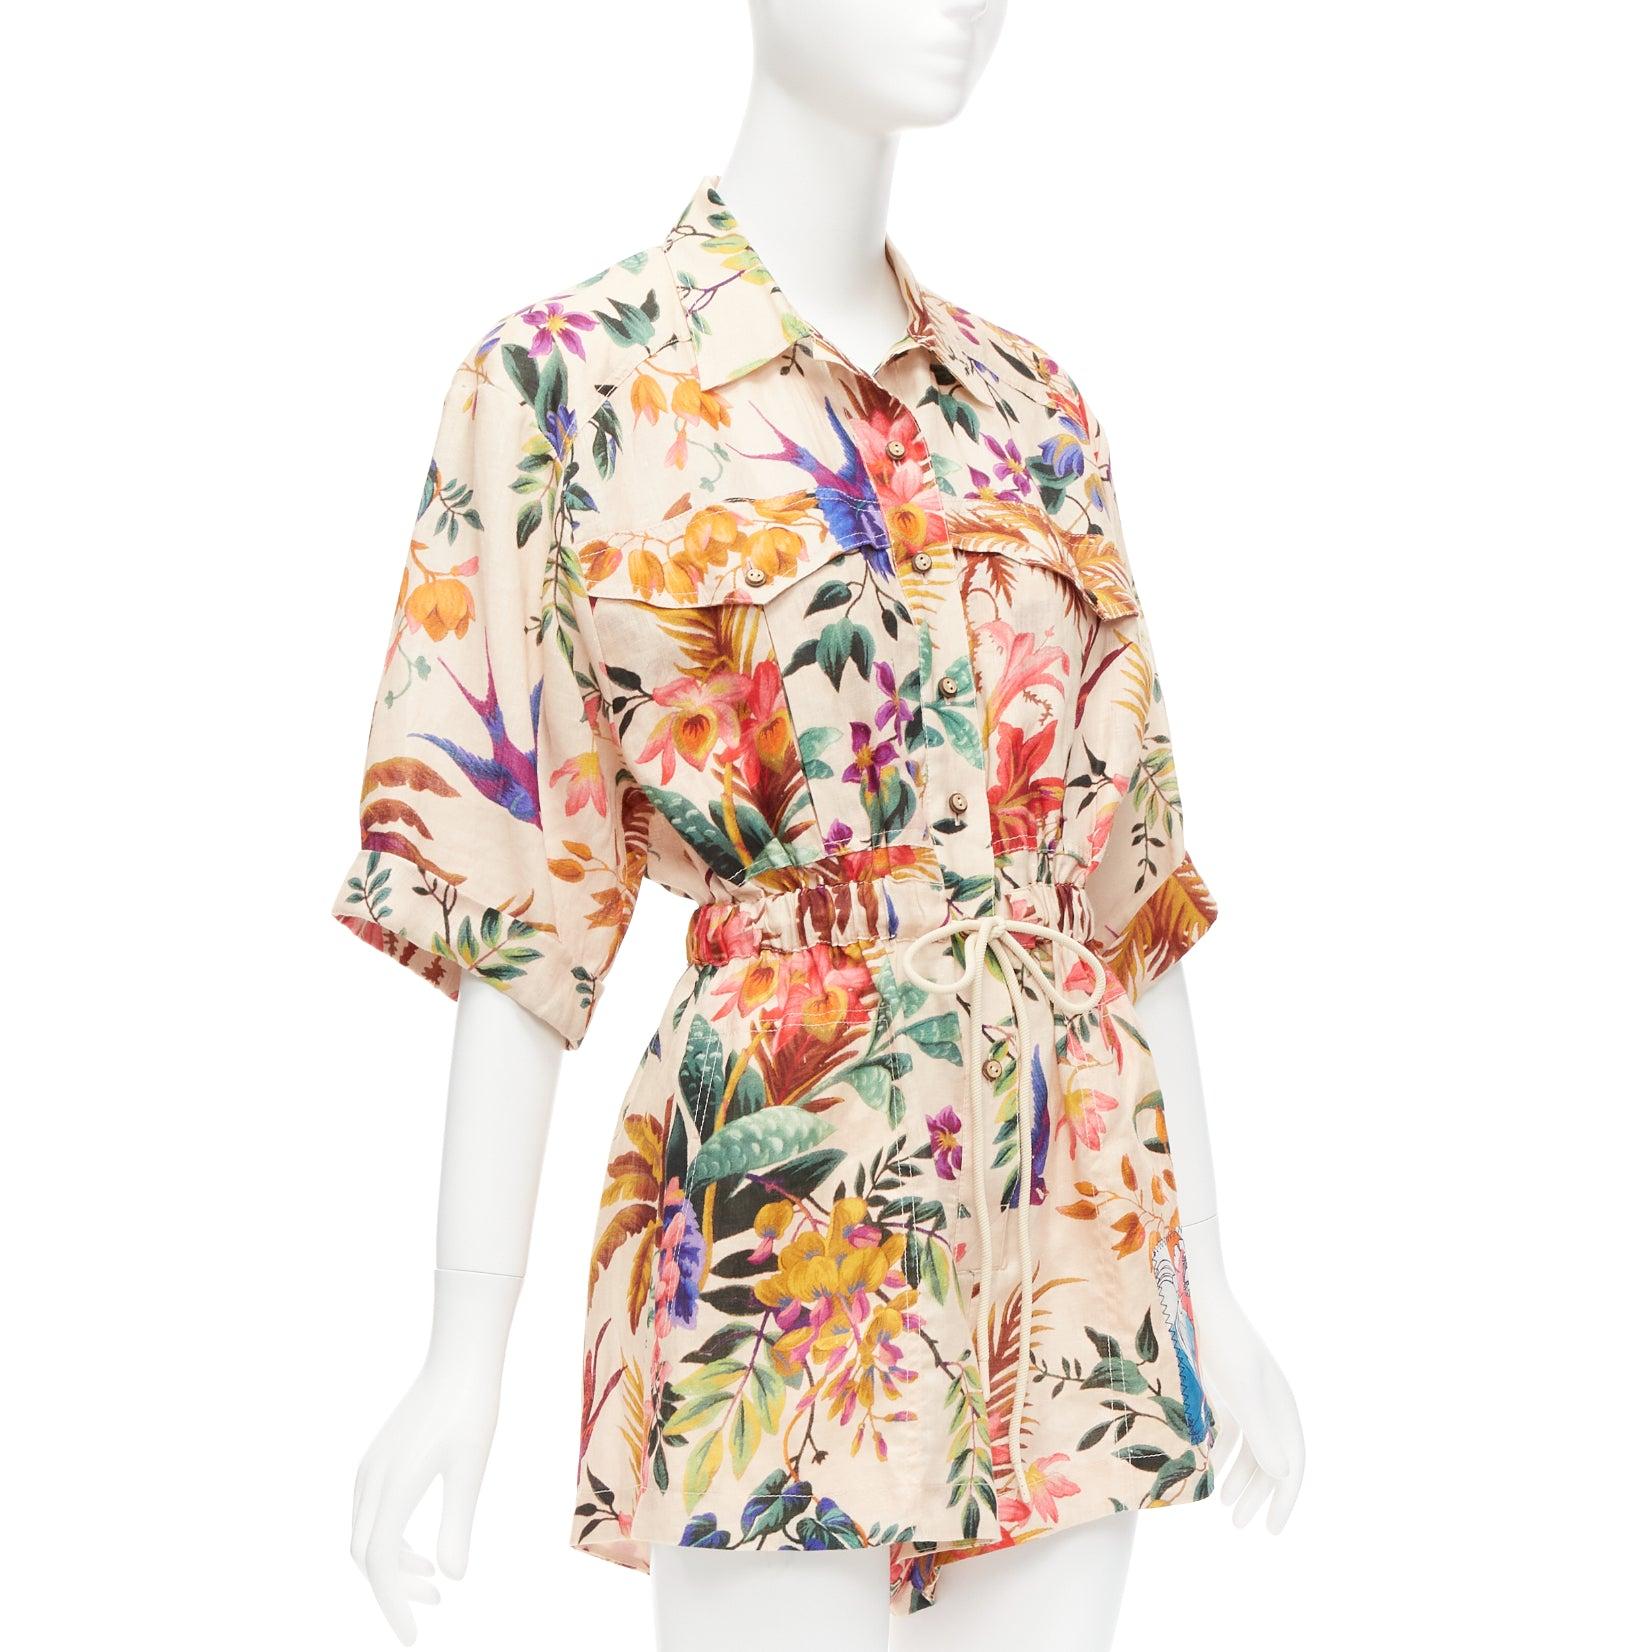 ZIMMERMANN 2022 Tropicana 100% linen cotton lined floral print playsuit Sz.0 S
Reference: AAWC/A00570
Brand: Zimmermann
Collection: Resort 2022 Tropicana
Material: Linen
Color: Nude, Multicolour
Pattern: Floral
Closure: Button
Lining: Beige